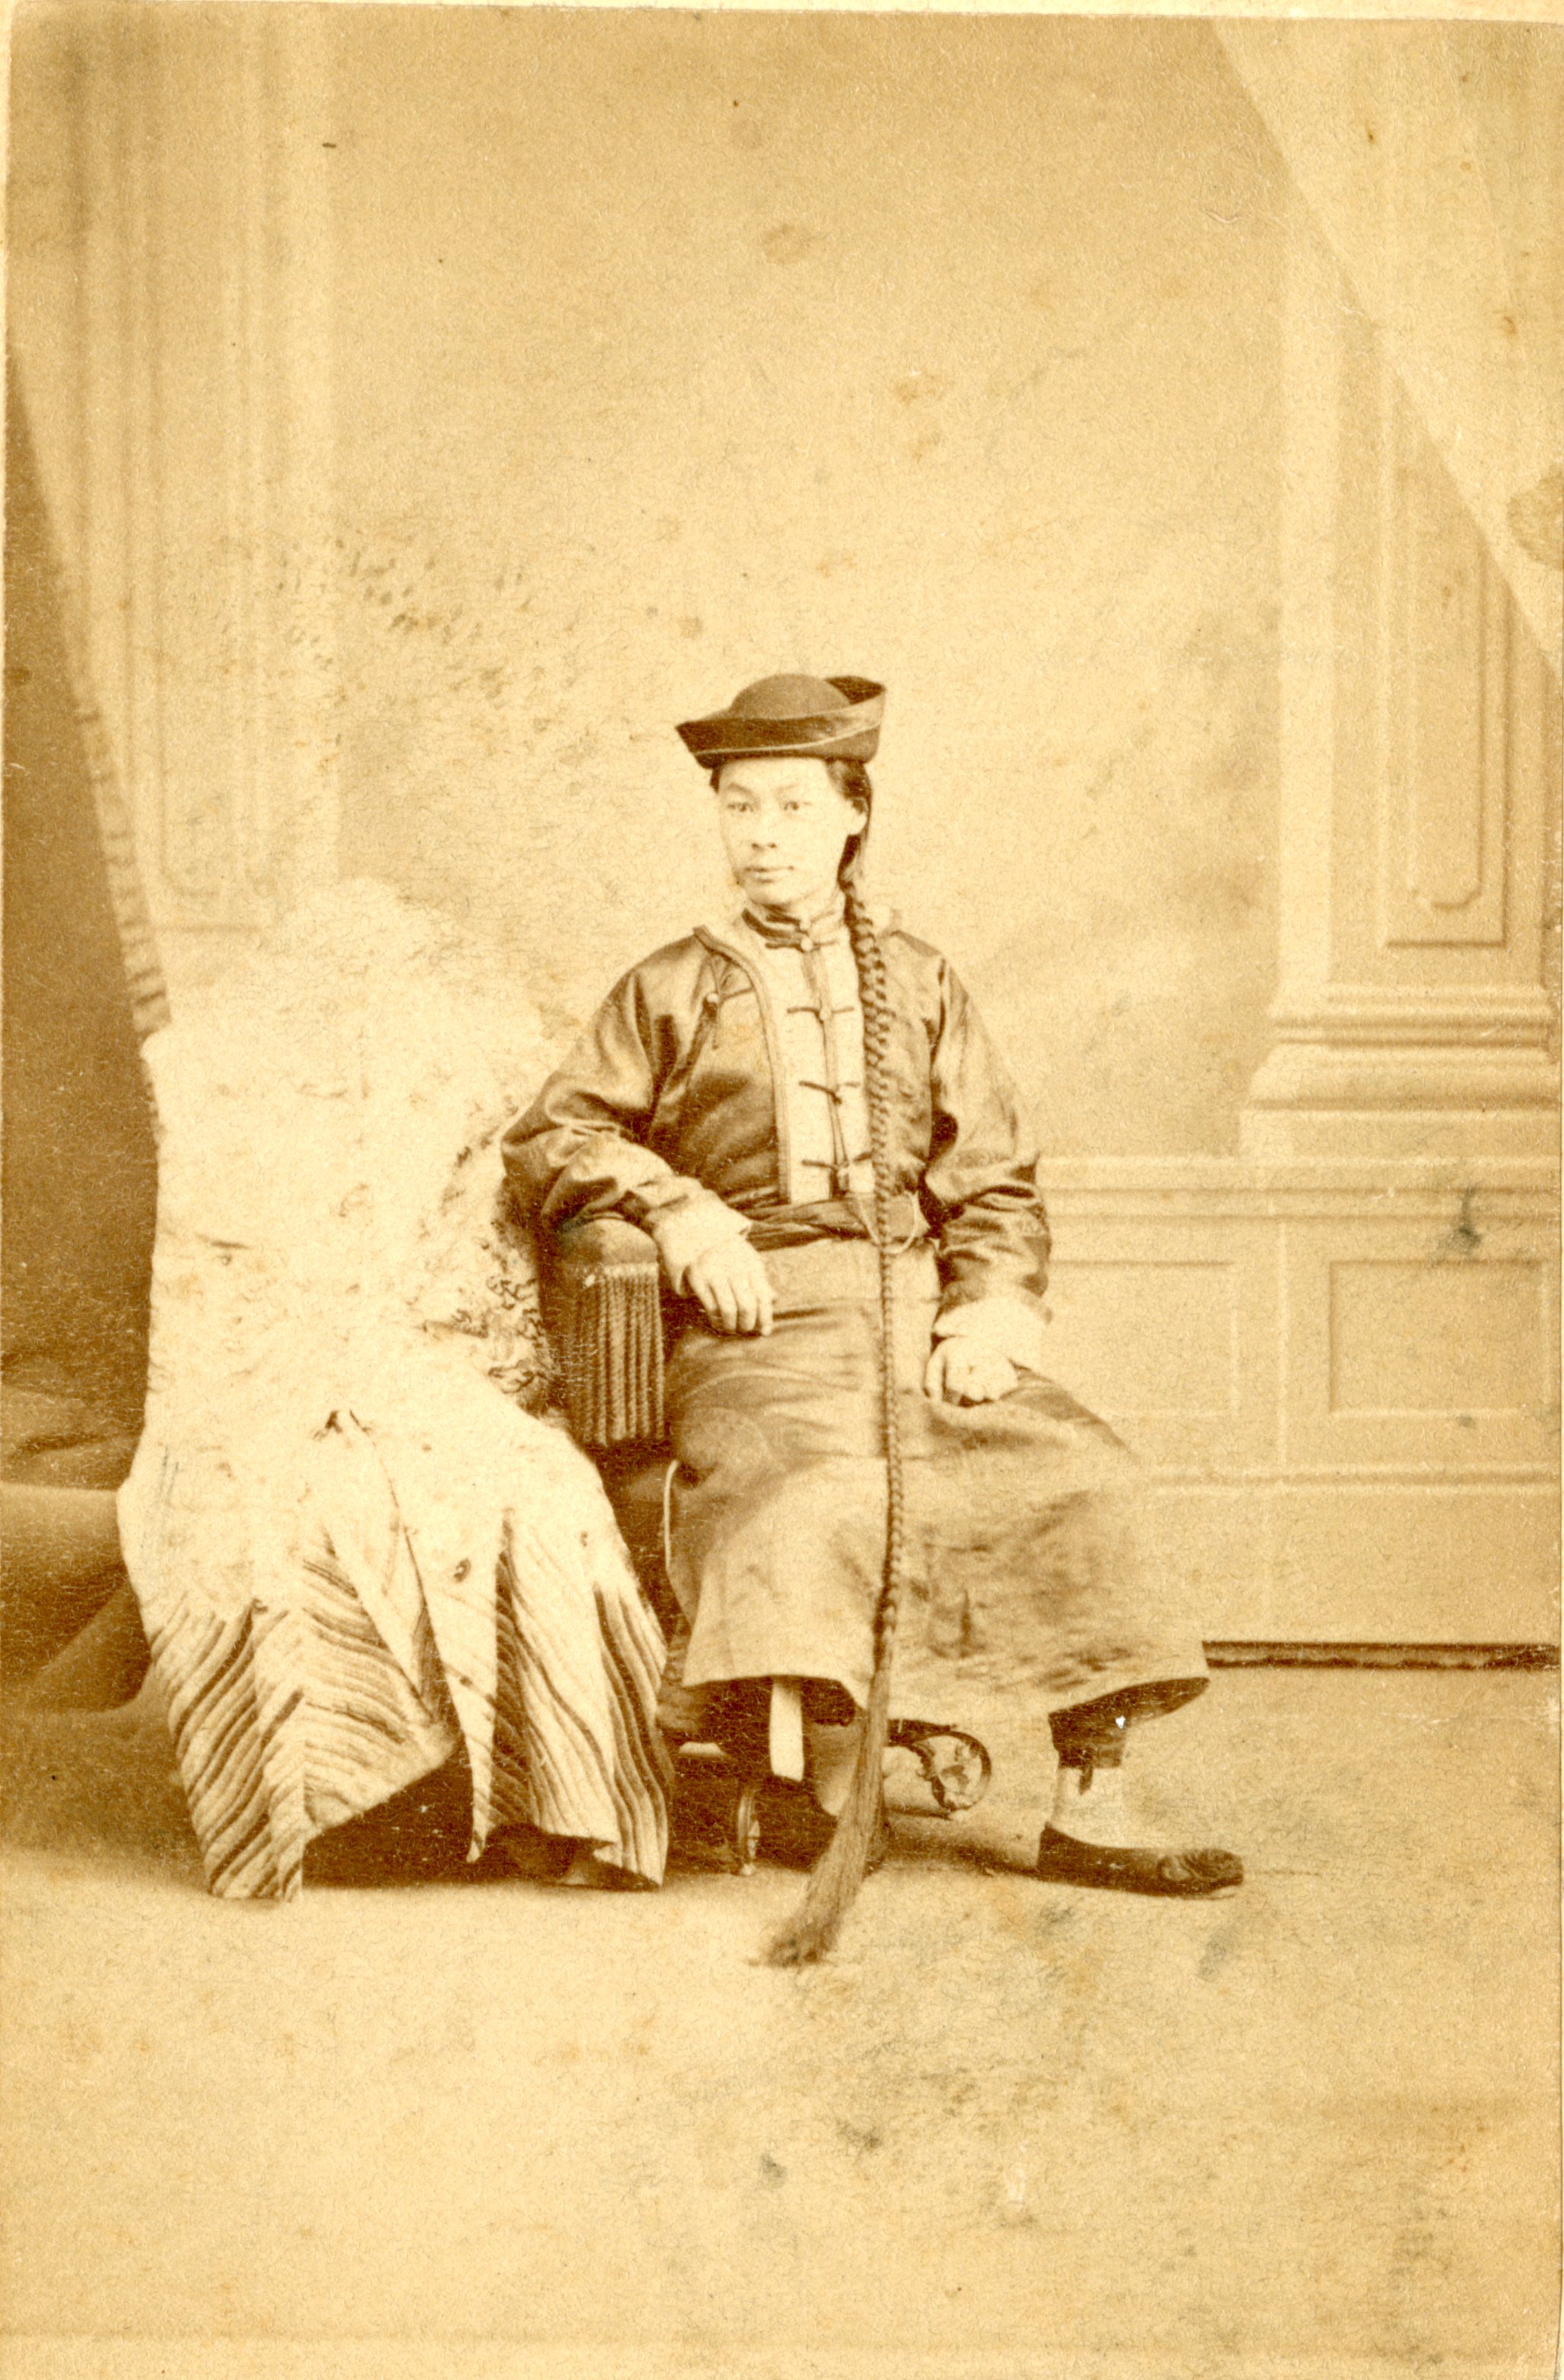 A woman in traditional clothing poses in a chair.